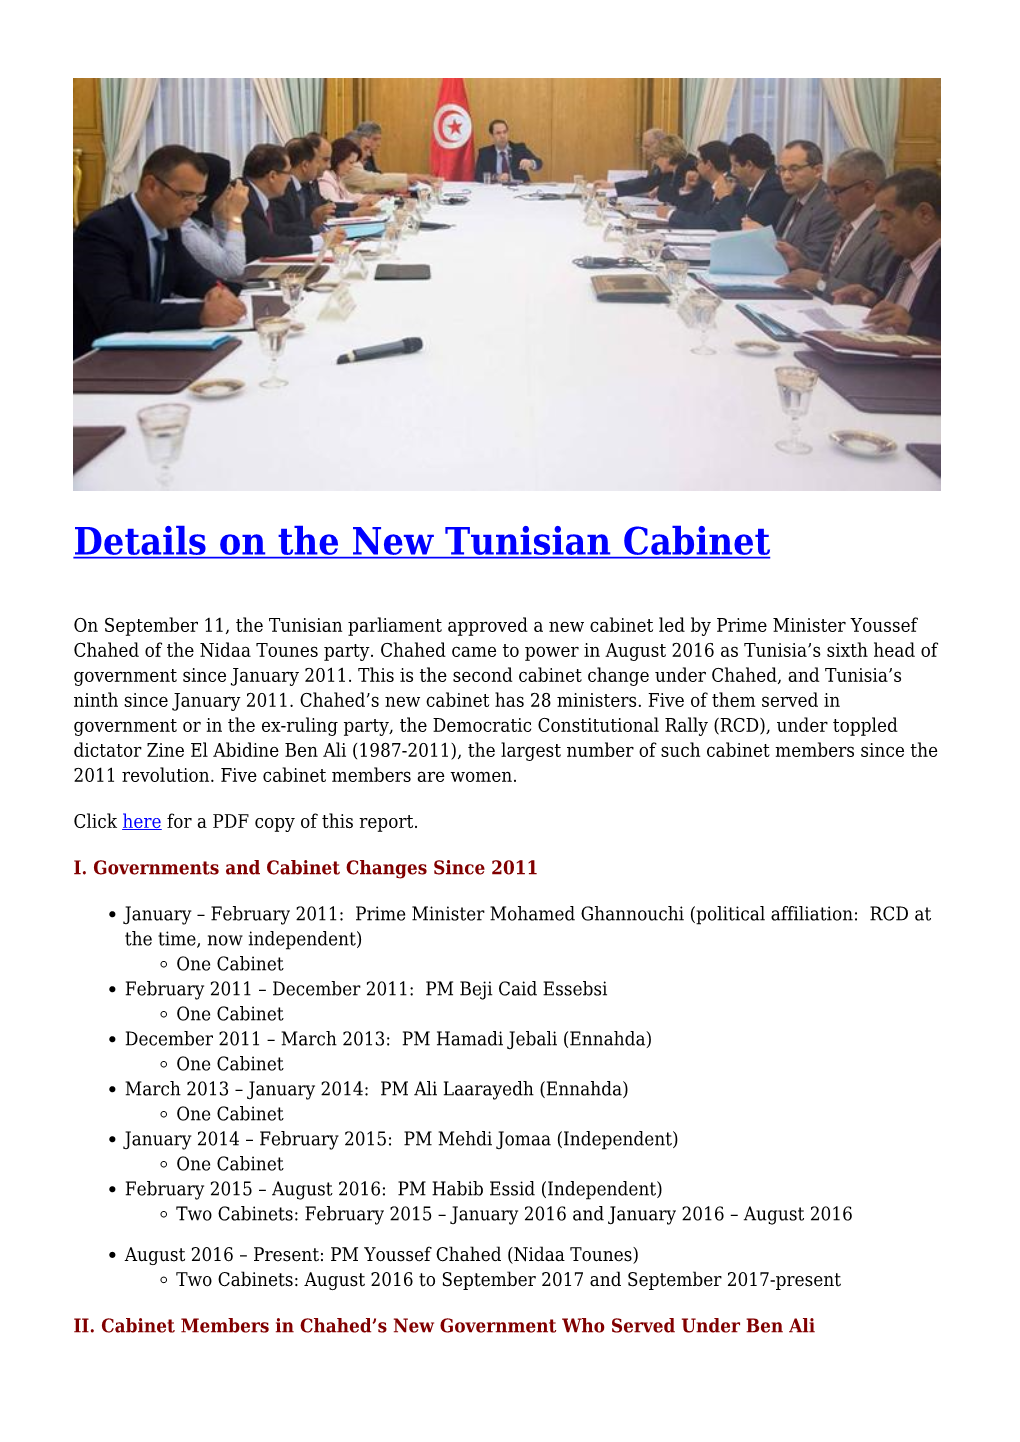 Details on the New Tunisian Cabinet